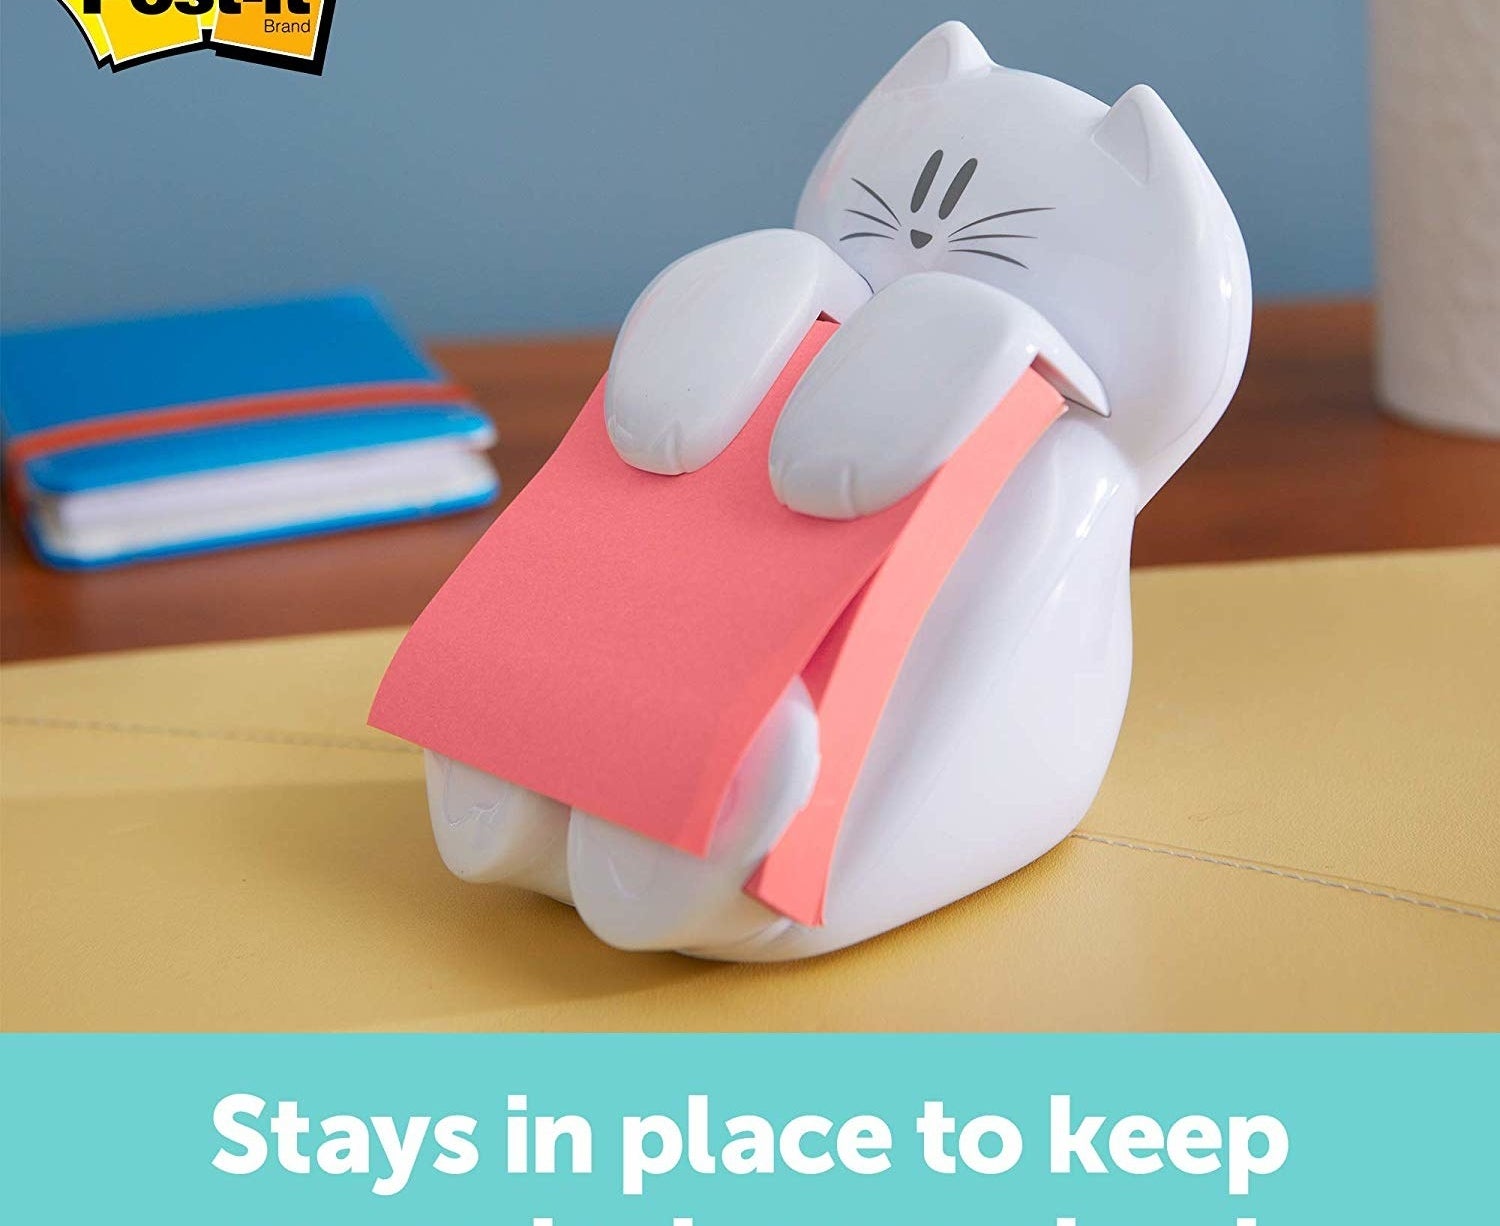 The cat-shaped sticky note dispenser sitting on a table holding a pad of pink stinky notes